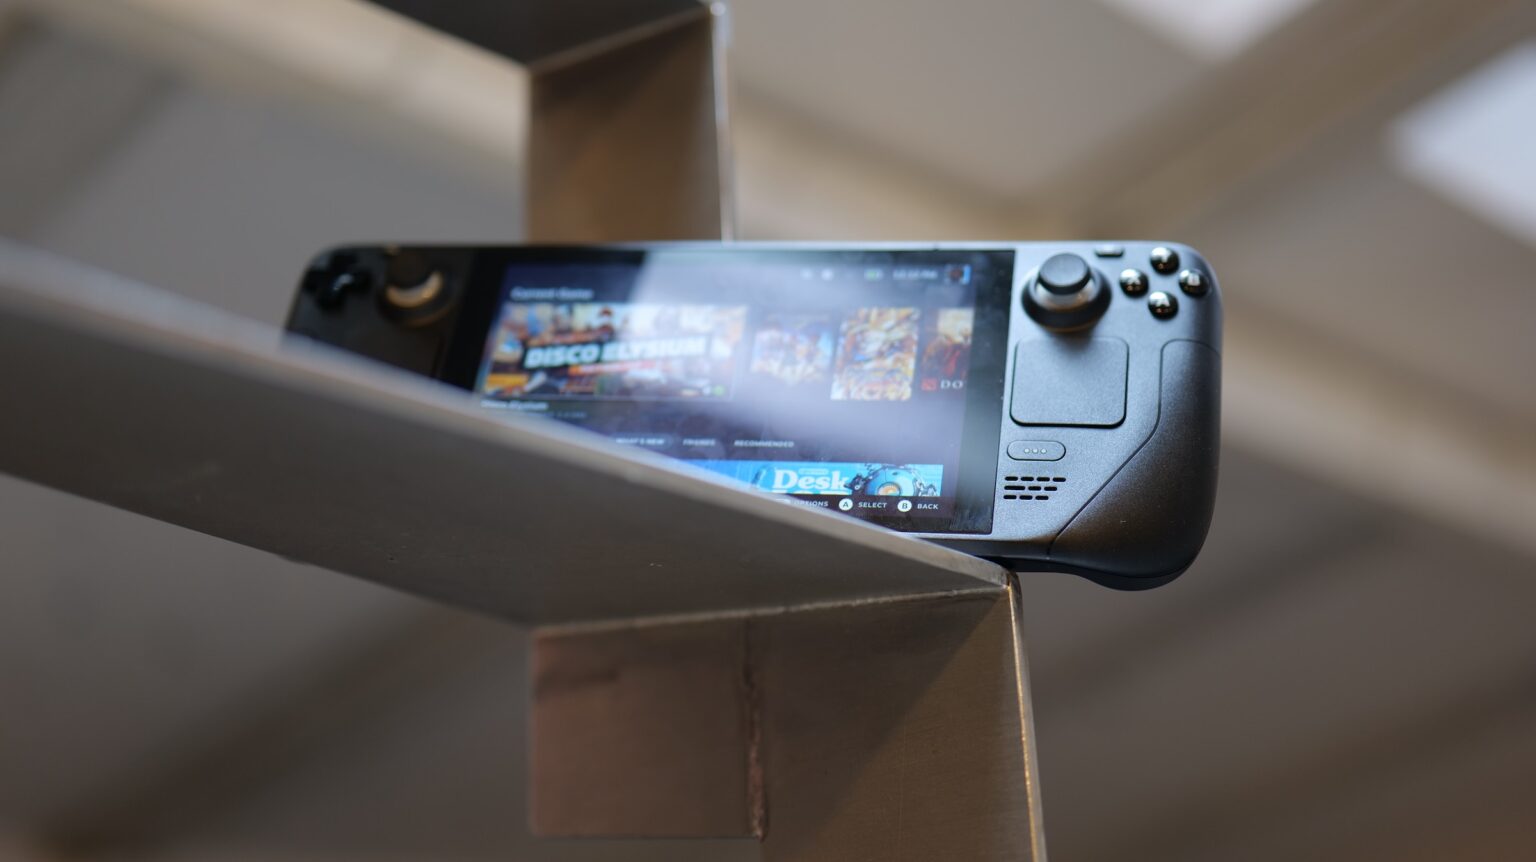 What exactly is the Steam Deck? Has this compact new console breathed new life into the handheld gaming scene? Let’s find out.